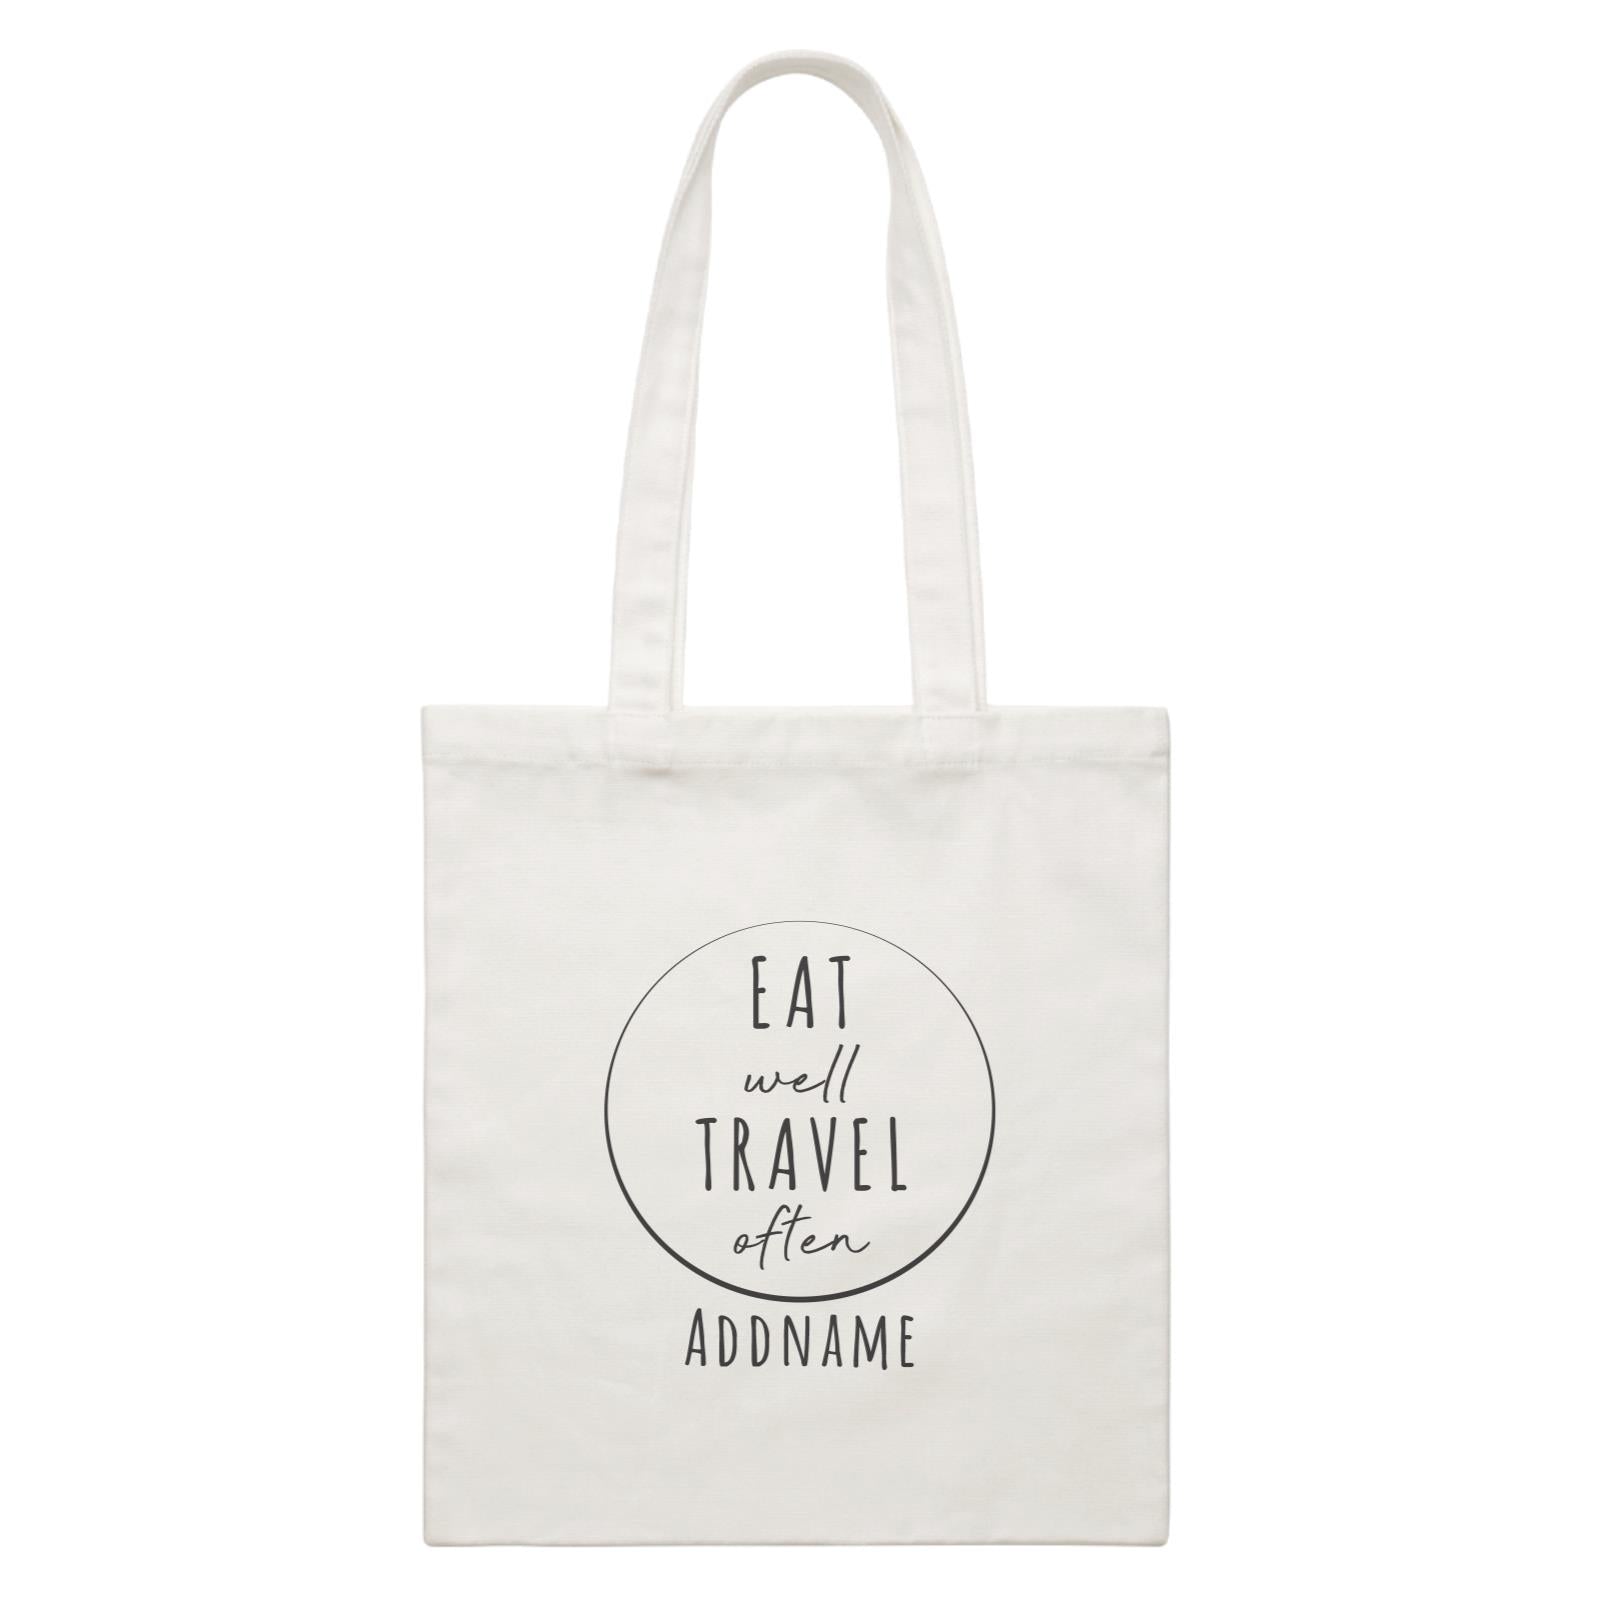 Travel Quotes Eat Well Travel Often Addname White Canvas Bag